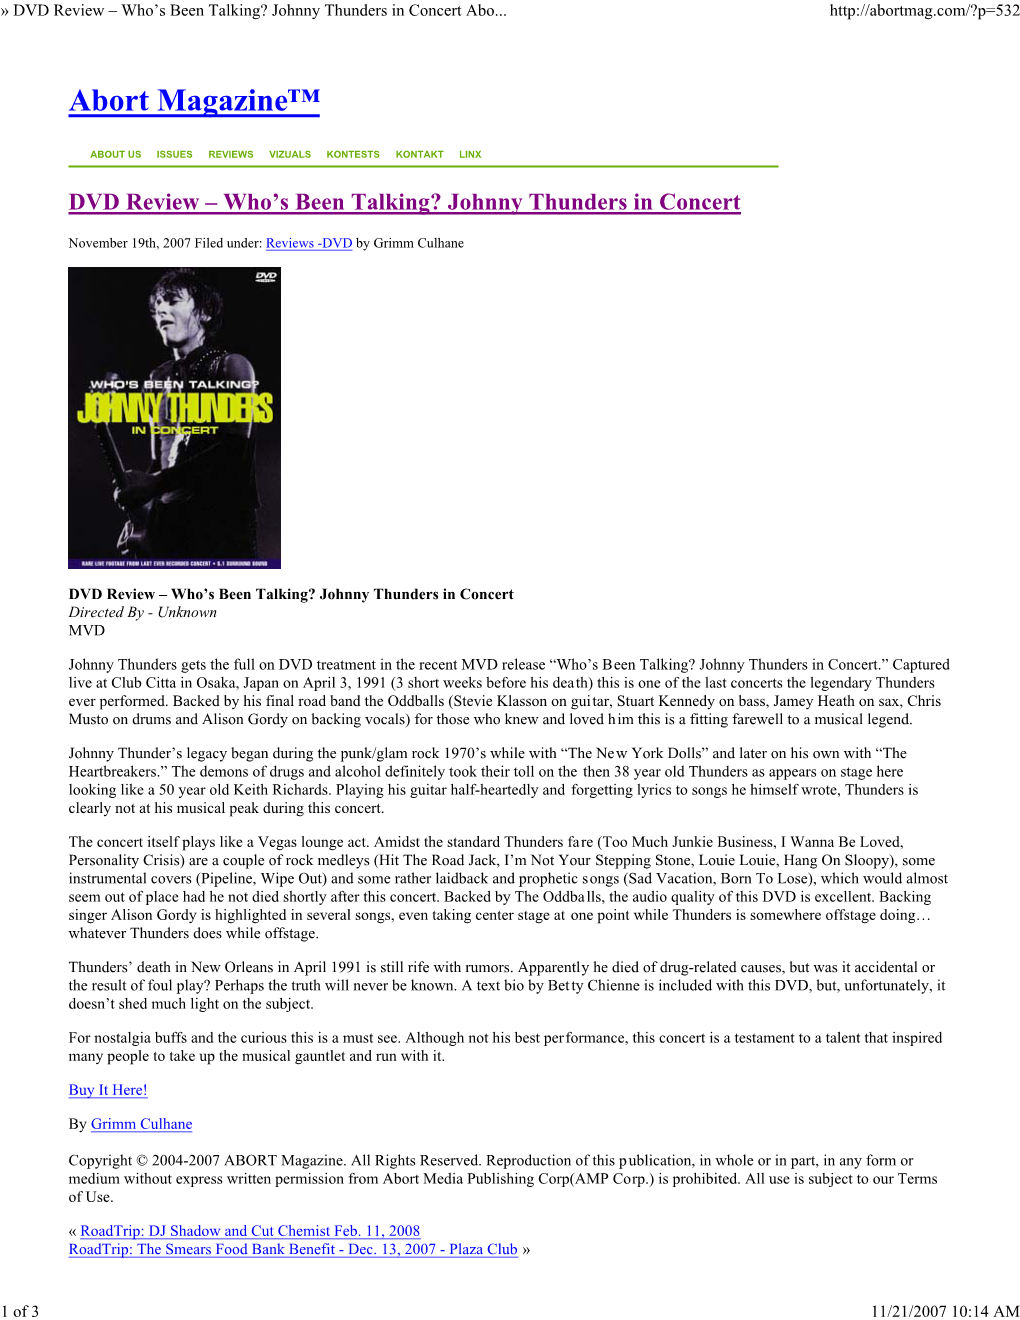 DVD Review – Who's Been Talking? Johnny Thunders in Concert